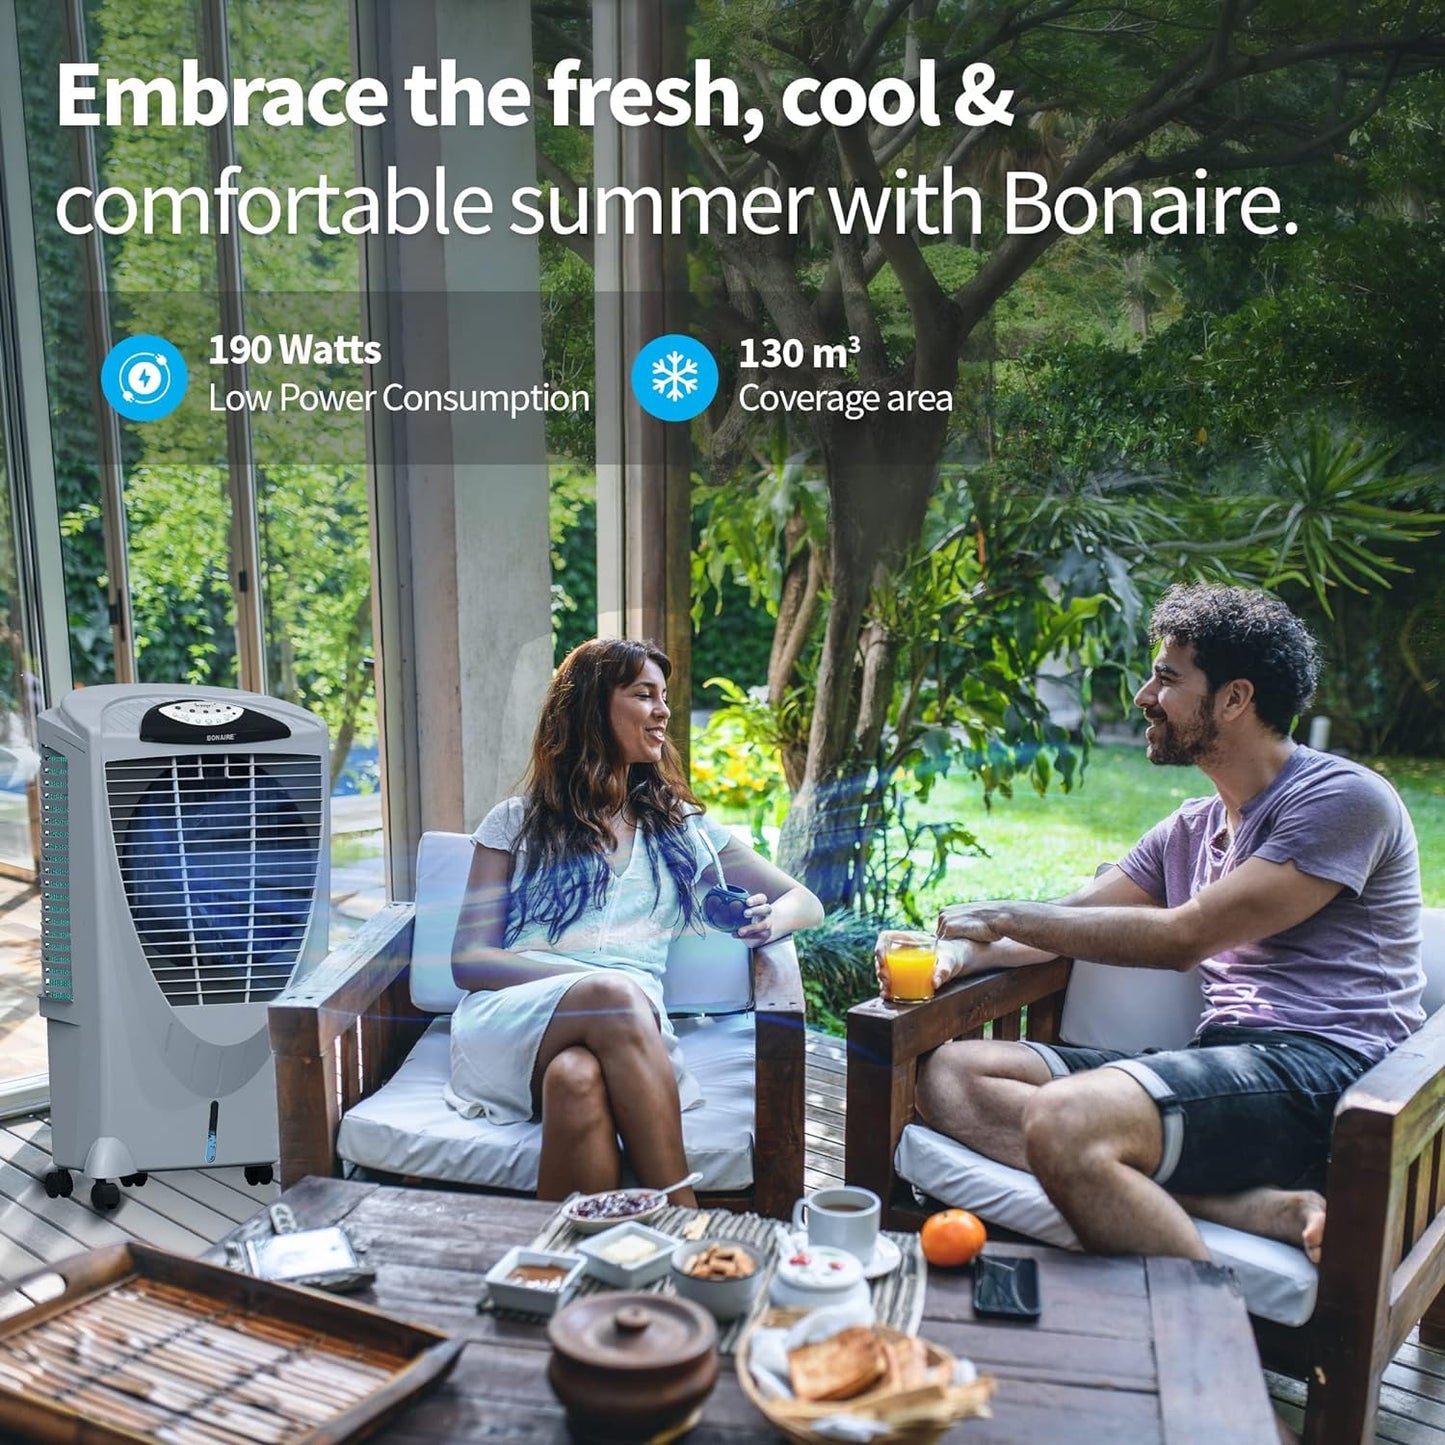 Bonaire Durango Portable Evaporative Air Cooler Conditioner 3100 CFM with Remote Control 950 sq. ft. Coverage, Swamp Cooler for Indoor, Outdoor, Commercial, Home, 15 Gallon